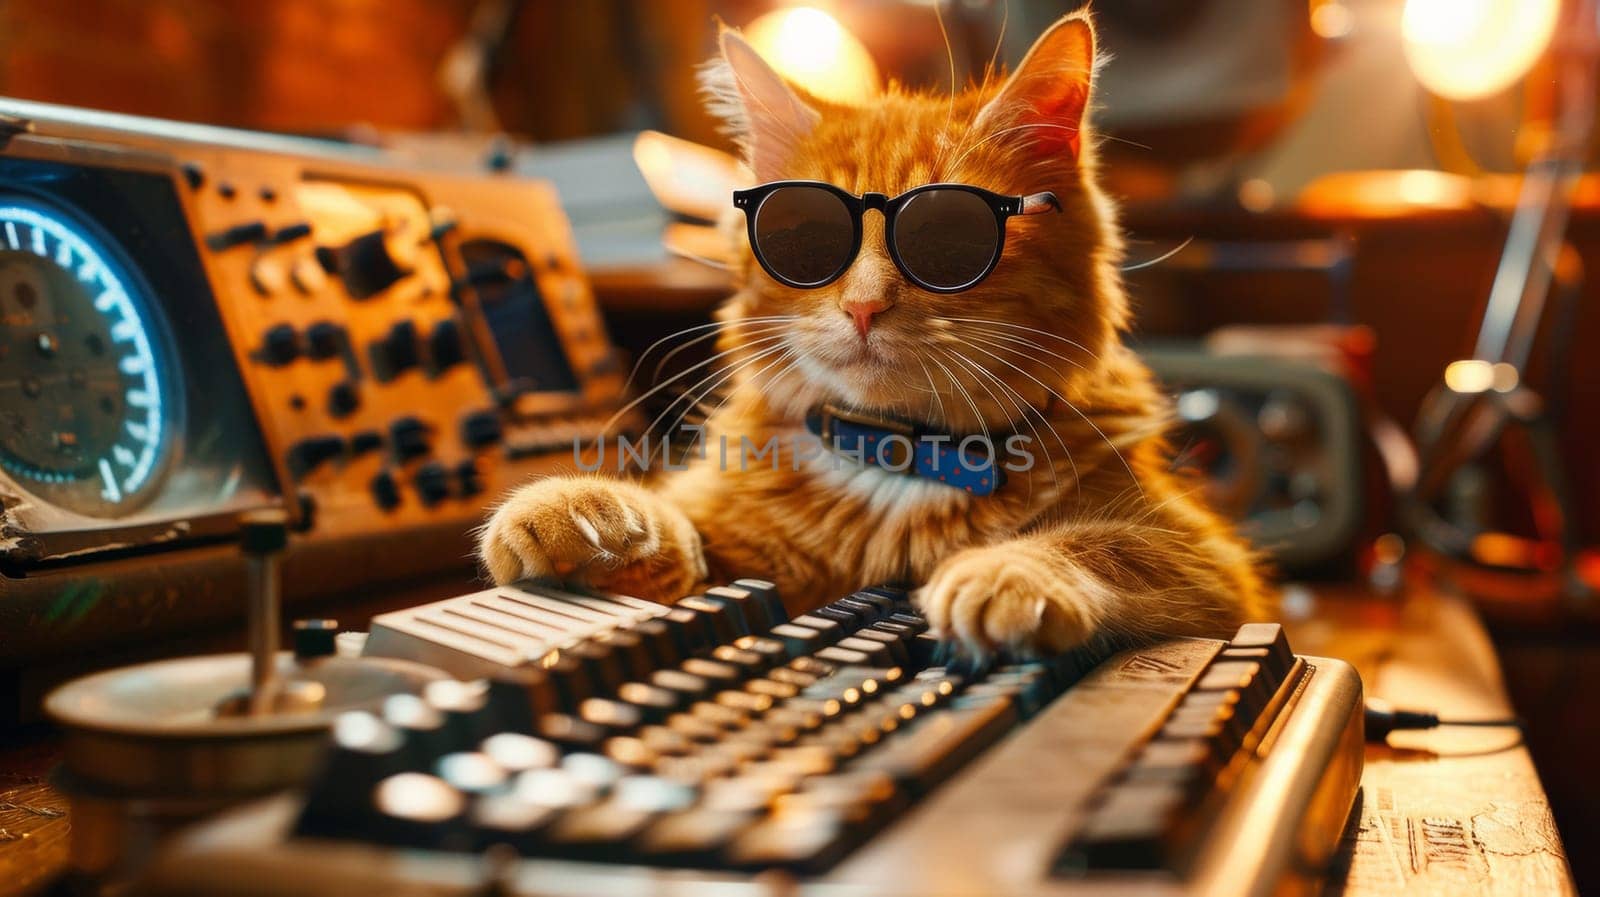 A cat wearing sunglasses and a keyboard with lights on it, AI by starush